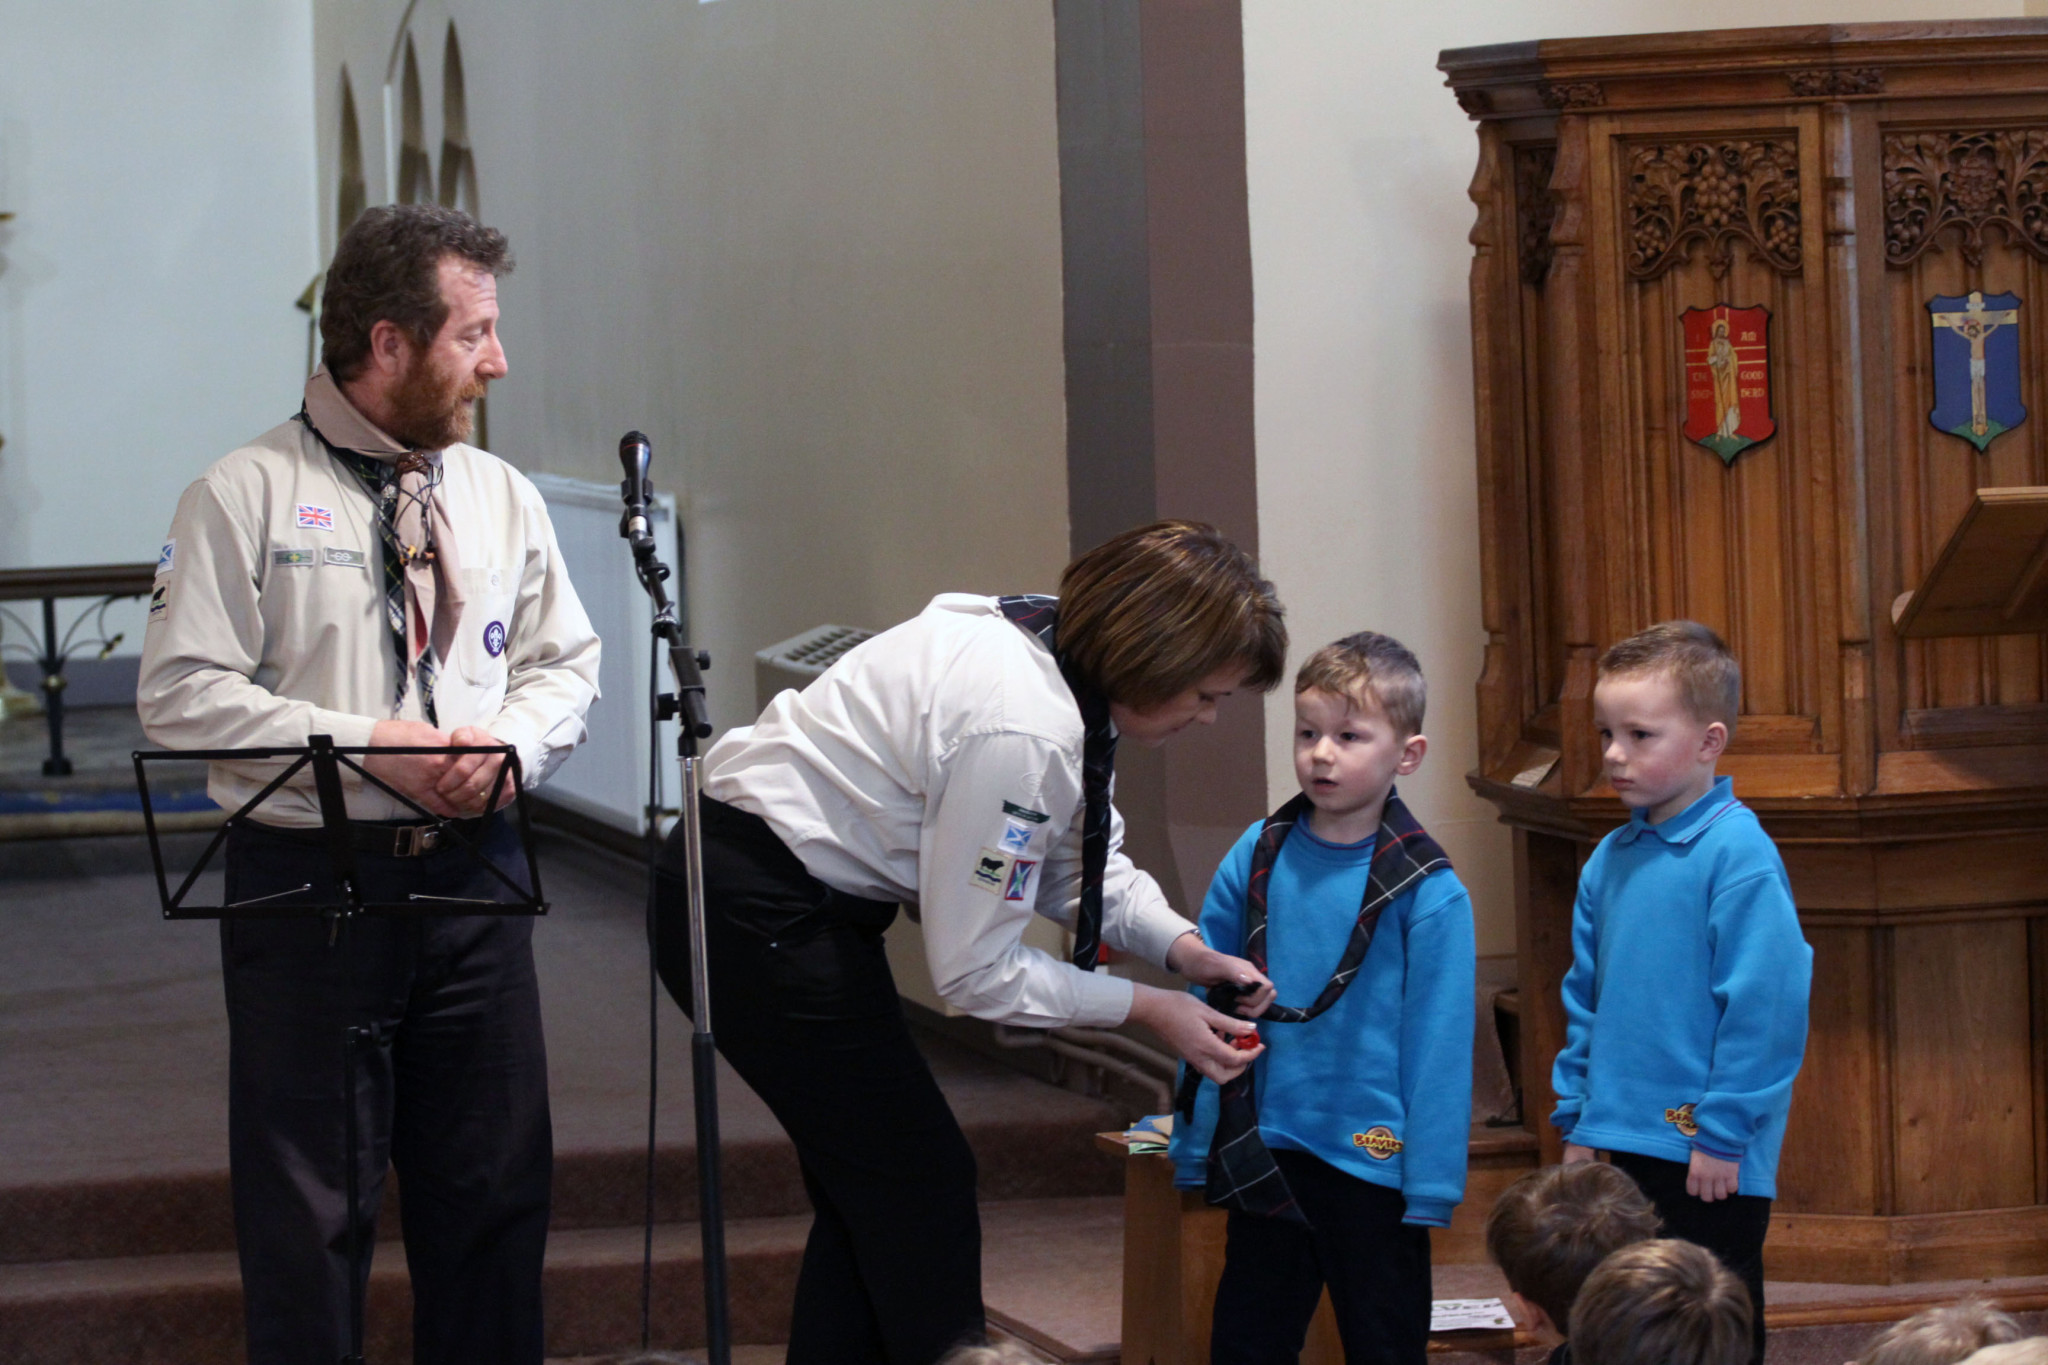 Two new beavers get invested